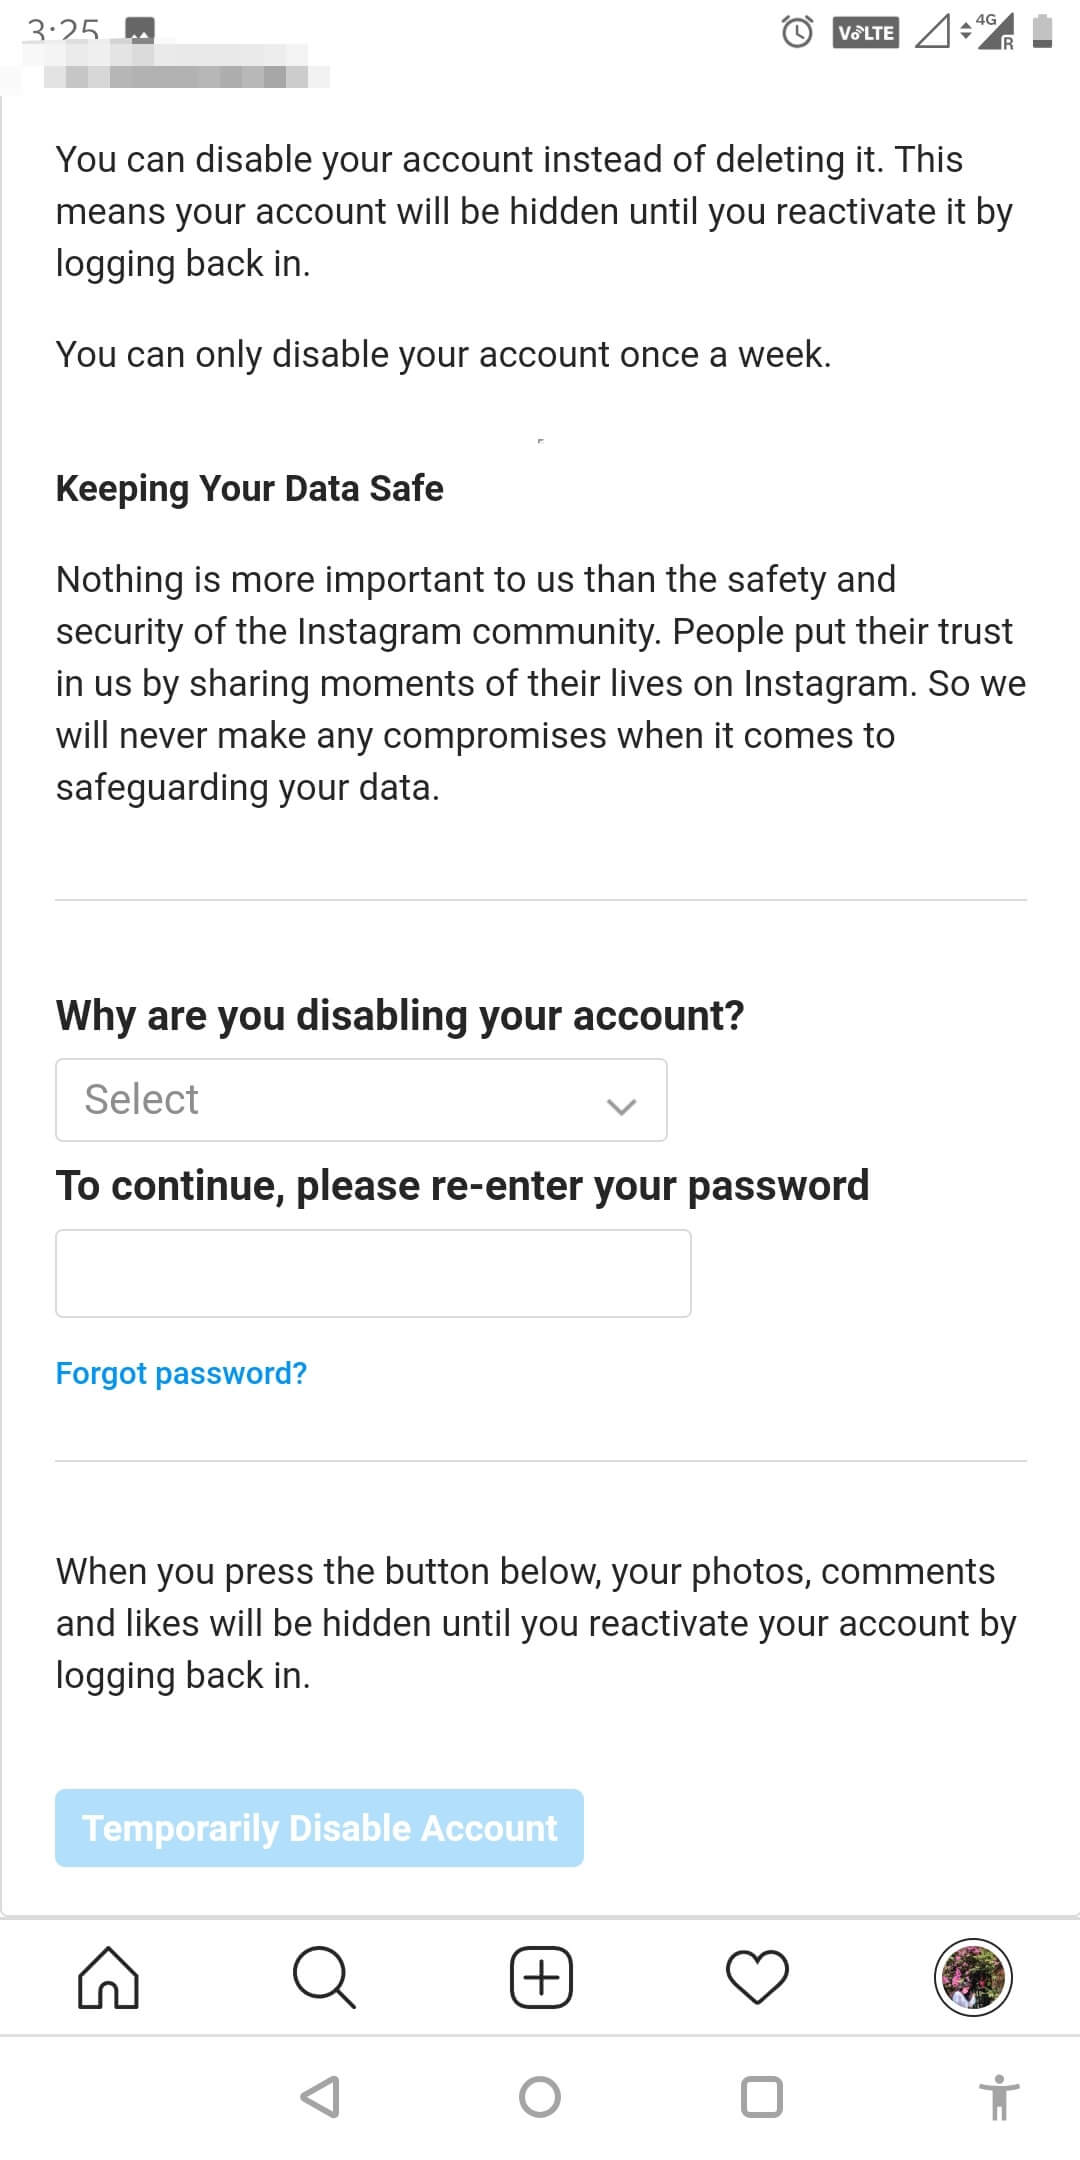 provide the reasons for your deactivation. Enter your password once again and tap on ‘Deactivate’. | How to Know When Someone Deactivates Their Instagram Account